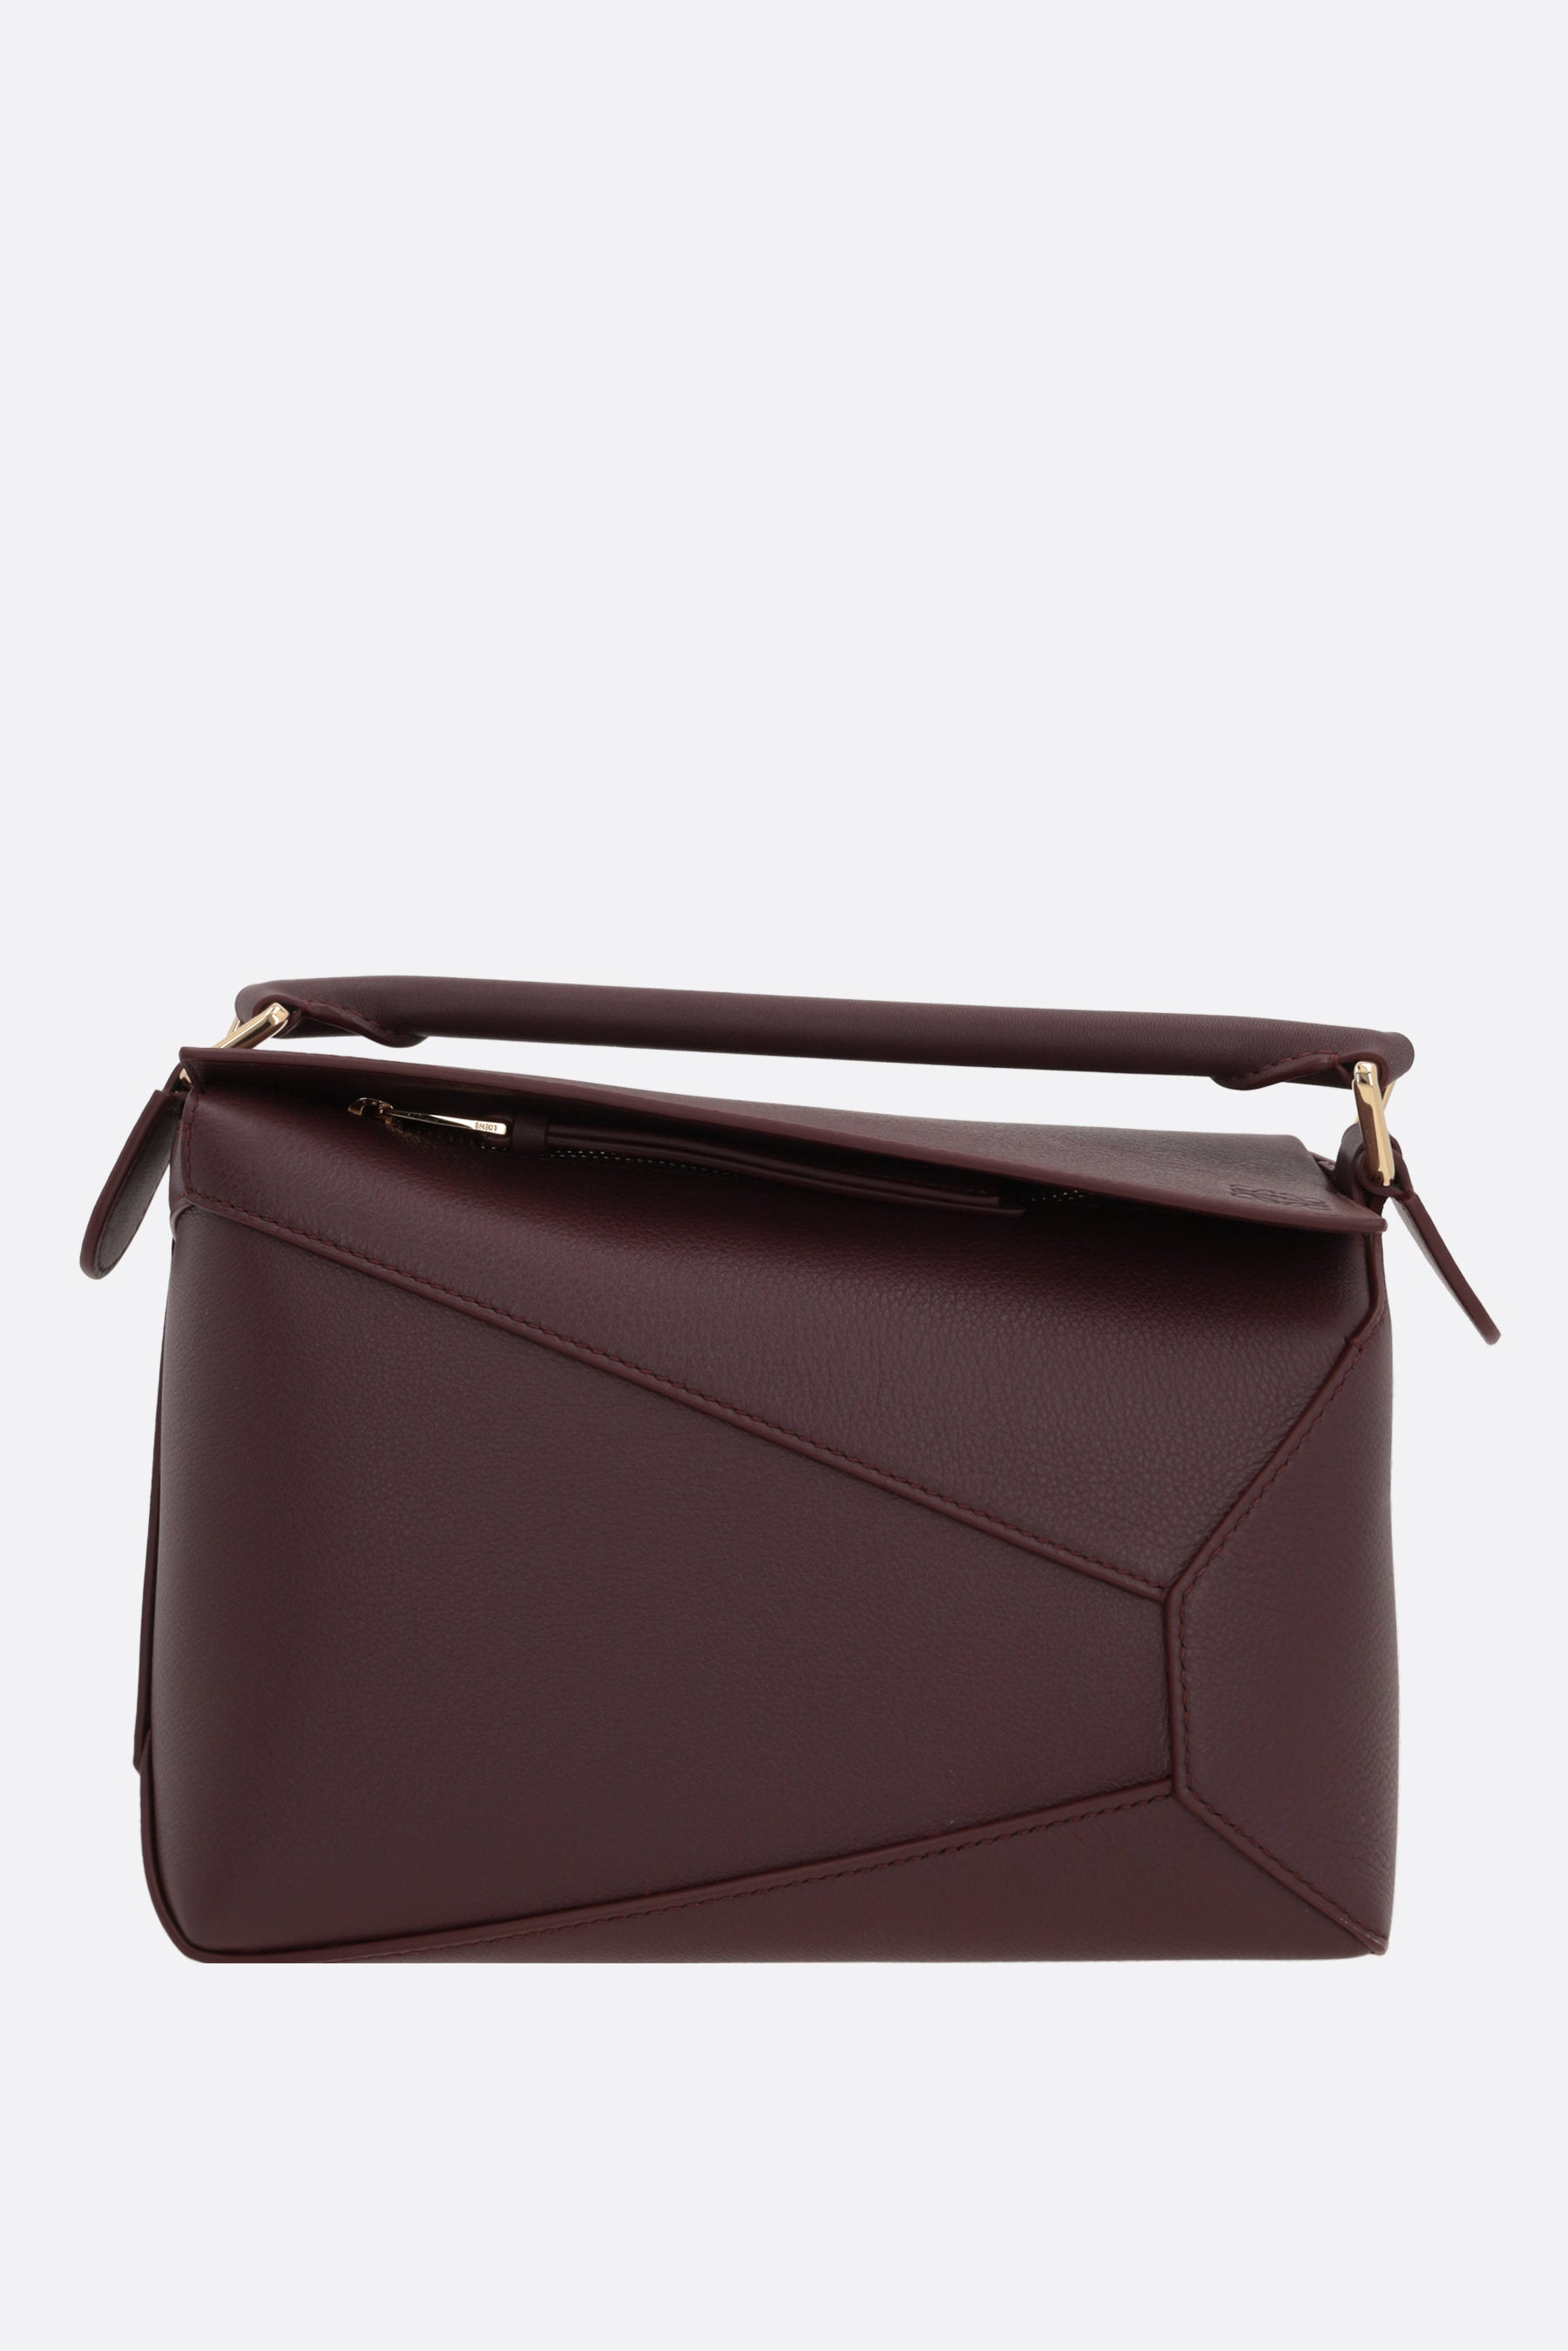 Puzzle small handbag in Classic leather